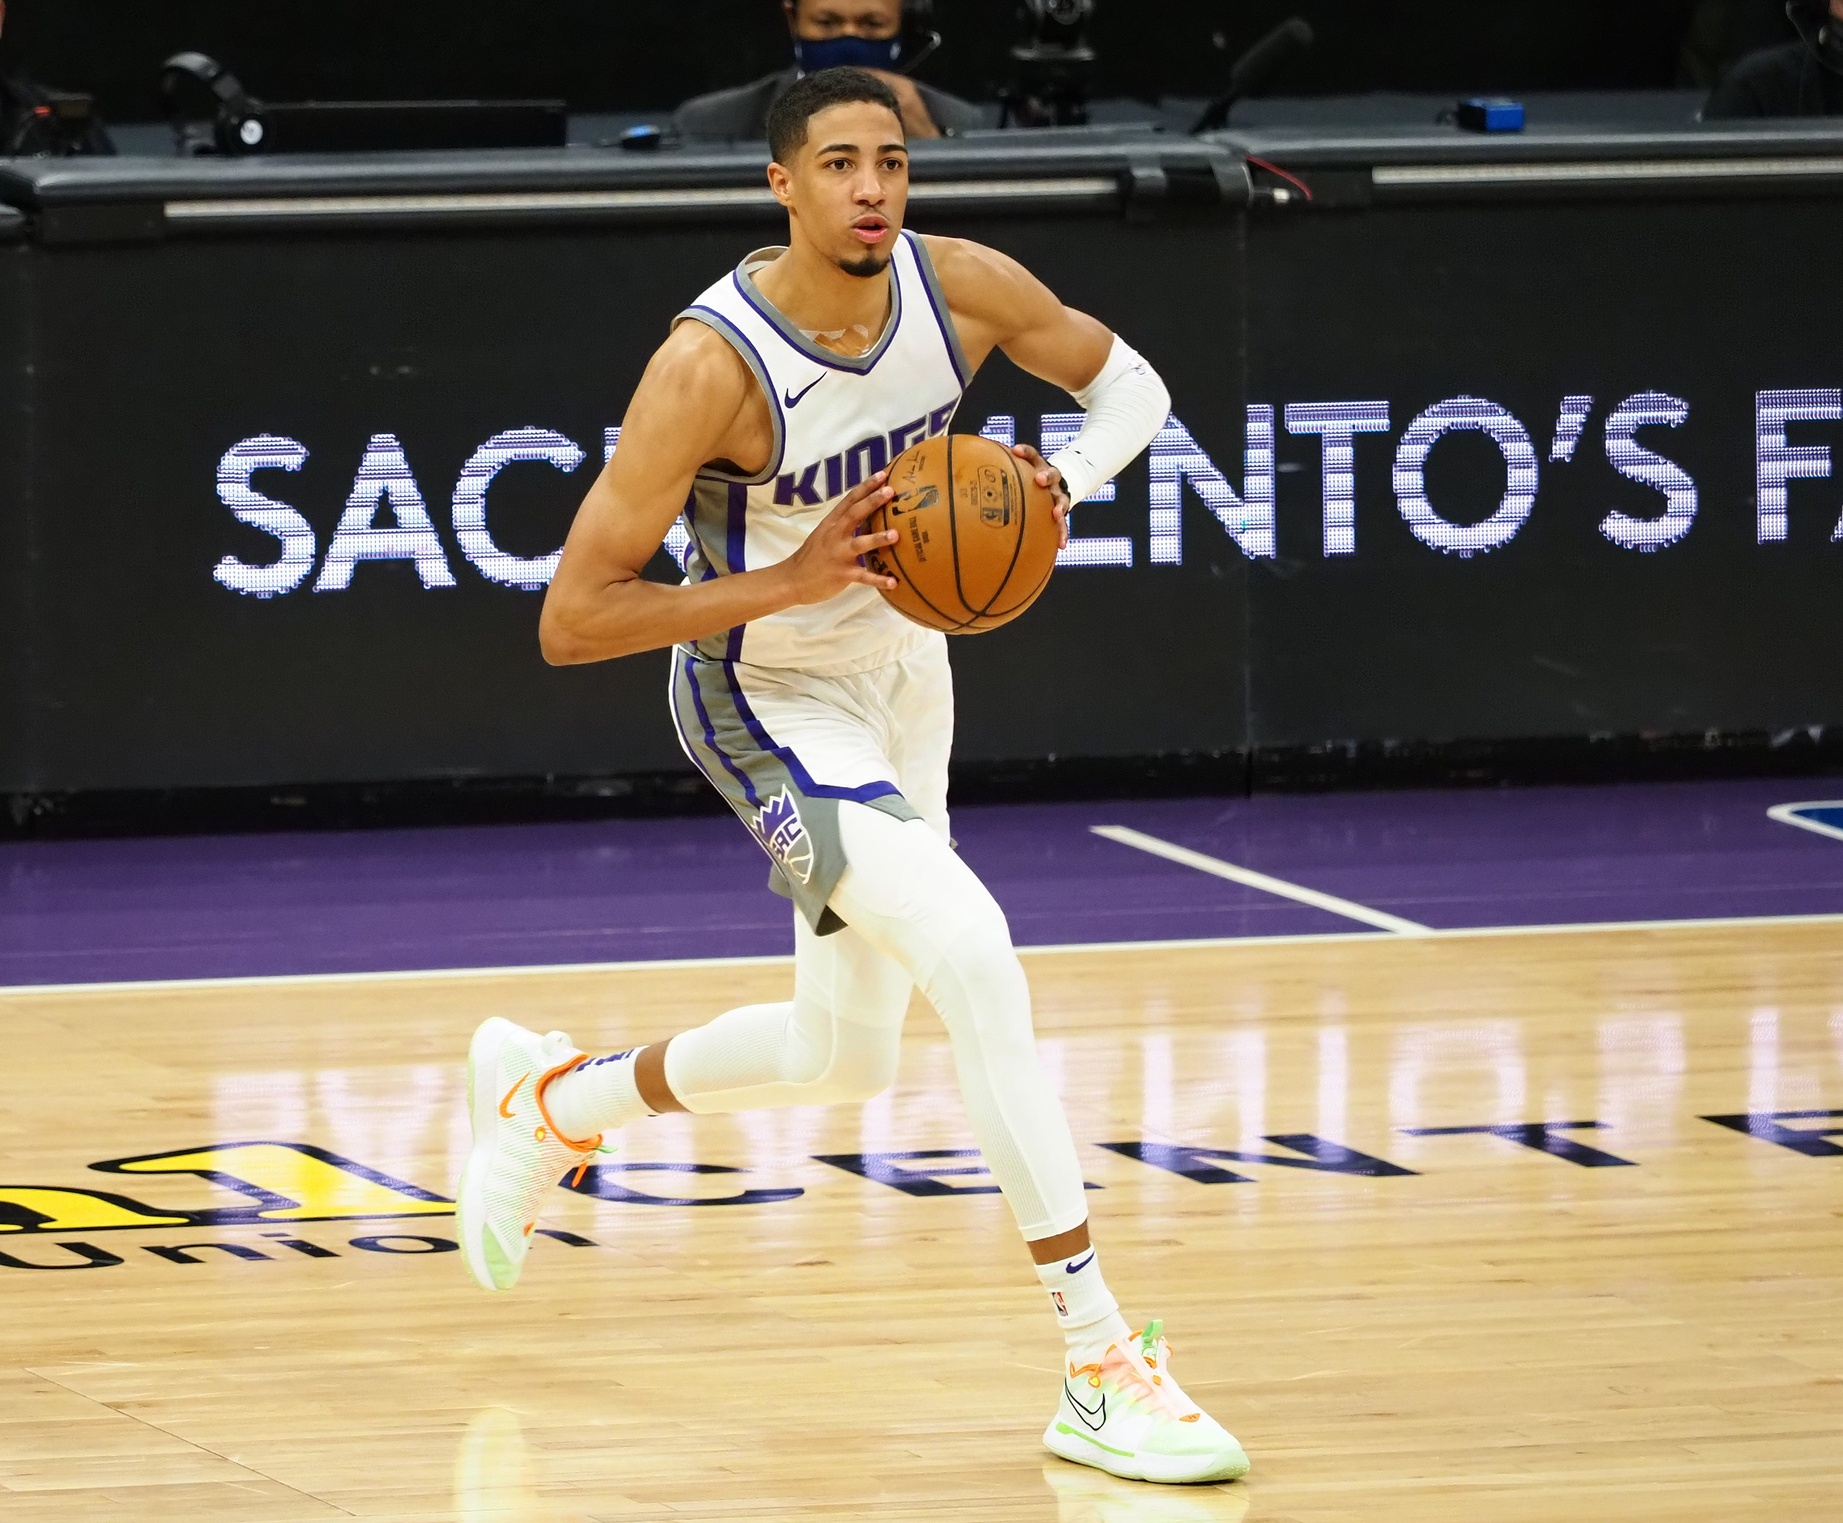 Top 10 NBA Rookie of the Year candidates Tyrese Haliburton making